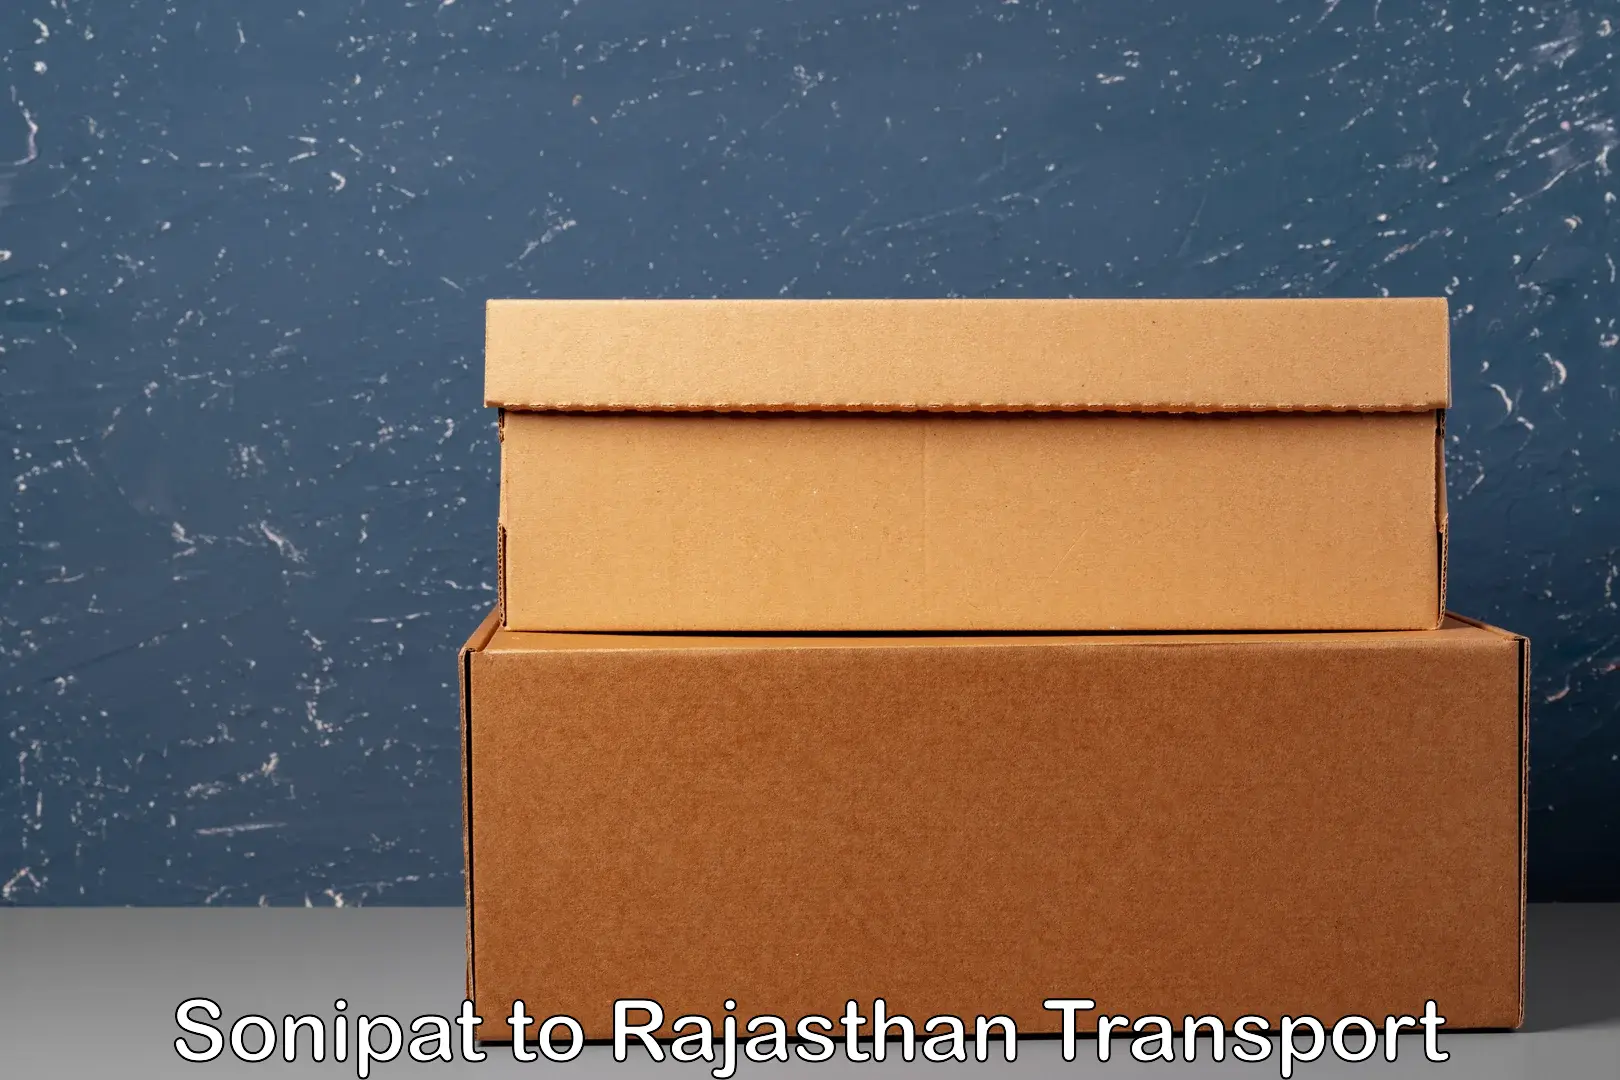 Daily parcel service transport Sonipat to Rajasthan